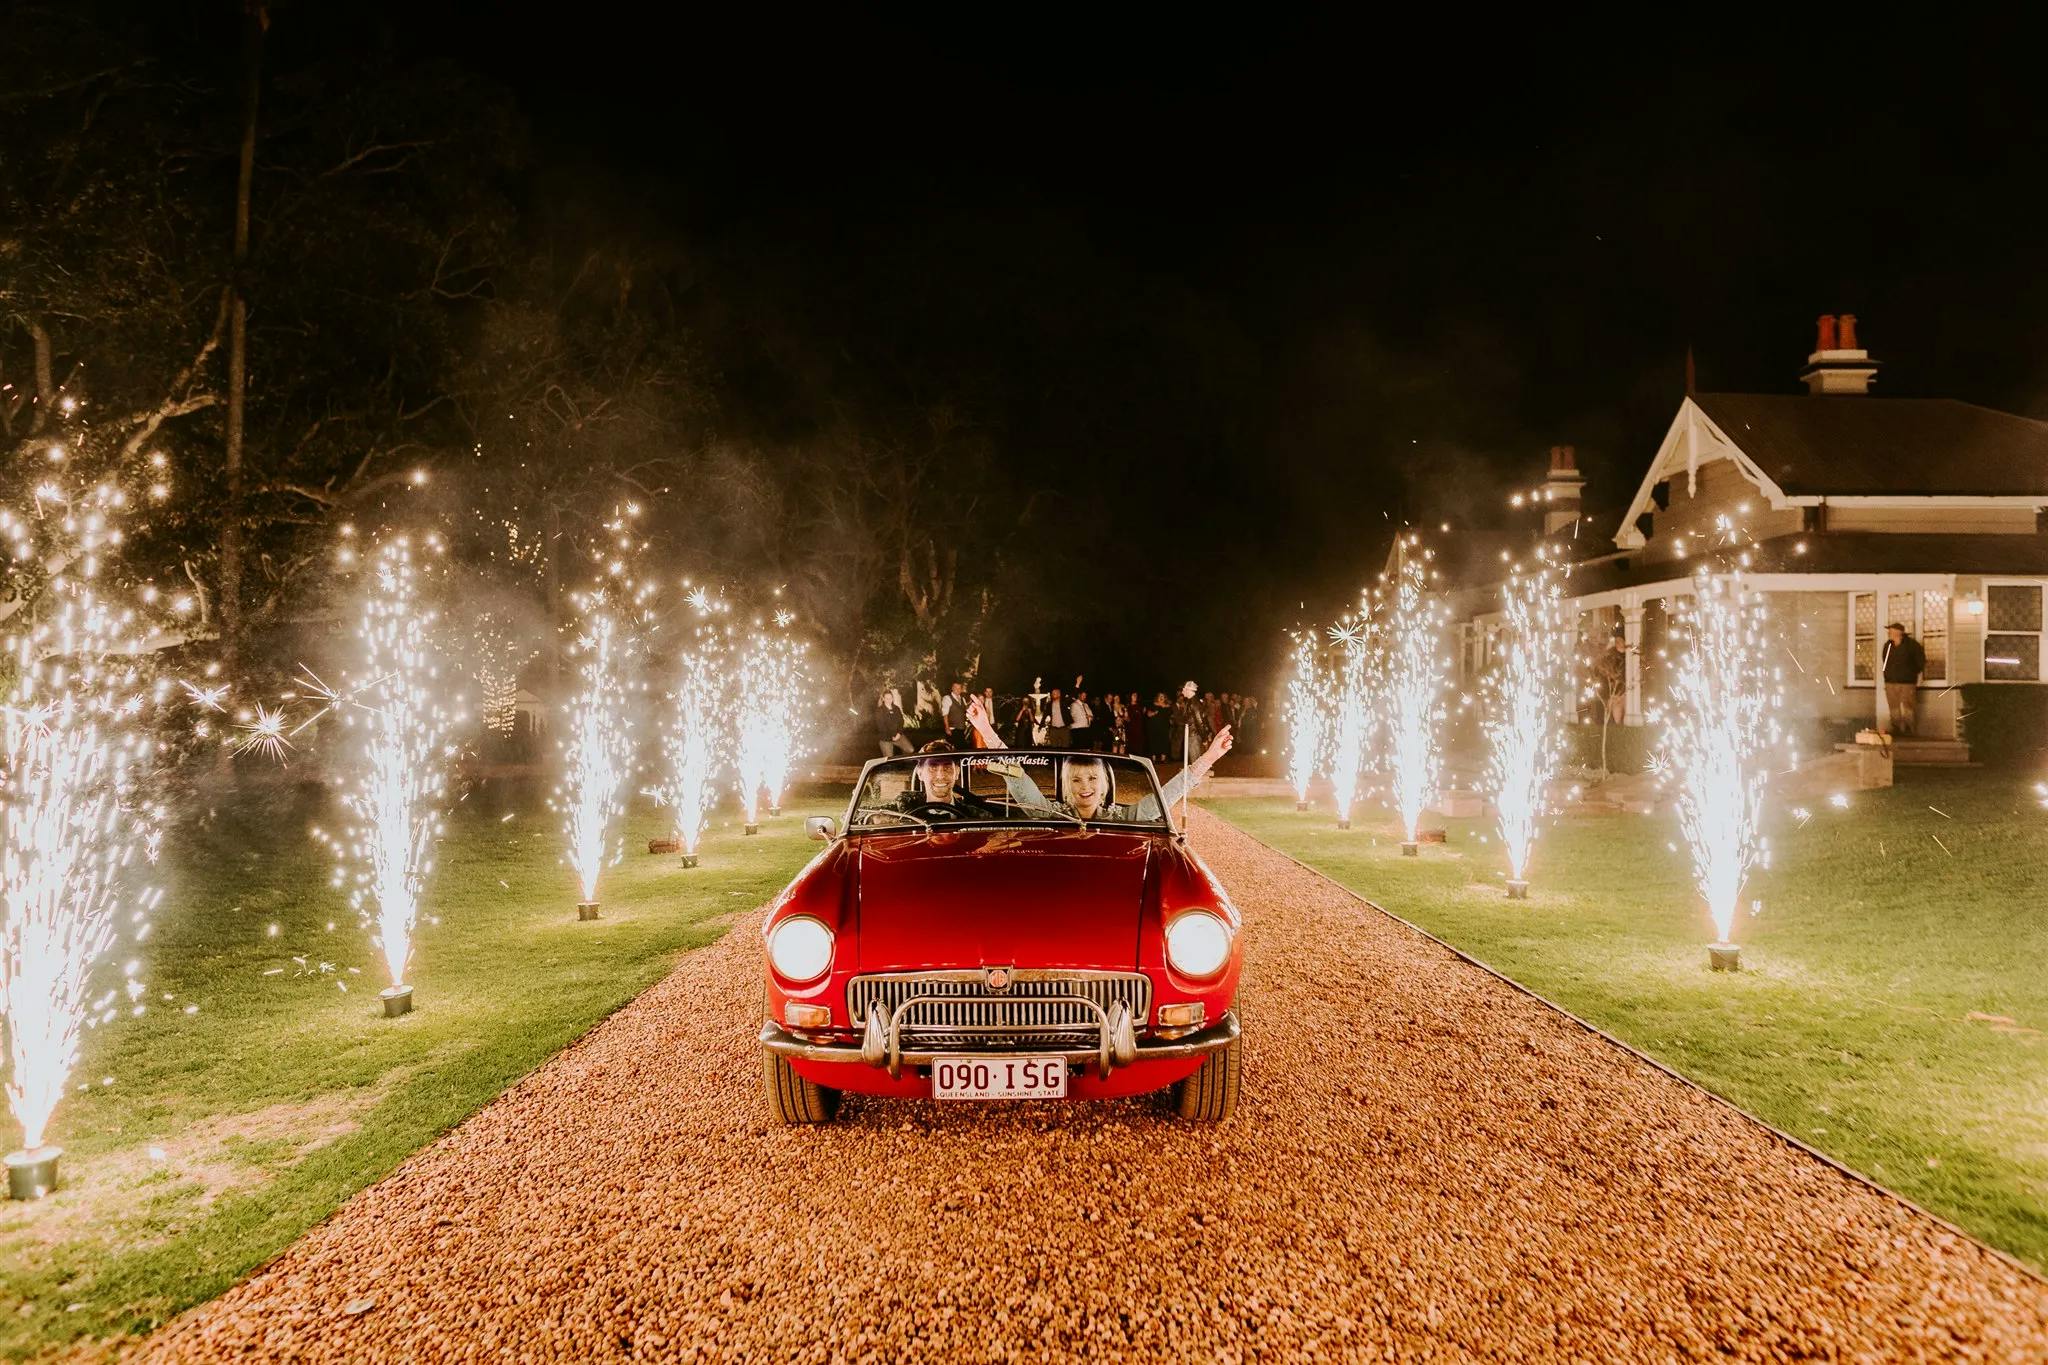 A vintage red convertible drives down a gravel driveway lined with bright sparklers, illuminating the night. The car carries passengers raising their arms in celebration. In the background, people watch from a lawn and a lit house is visible.